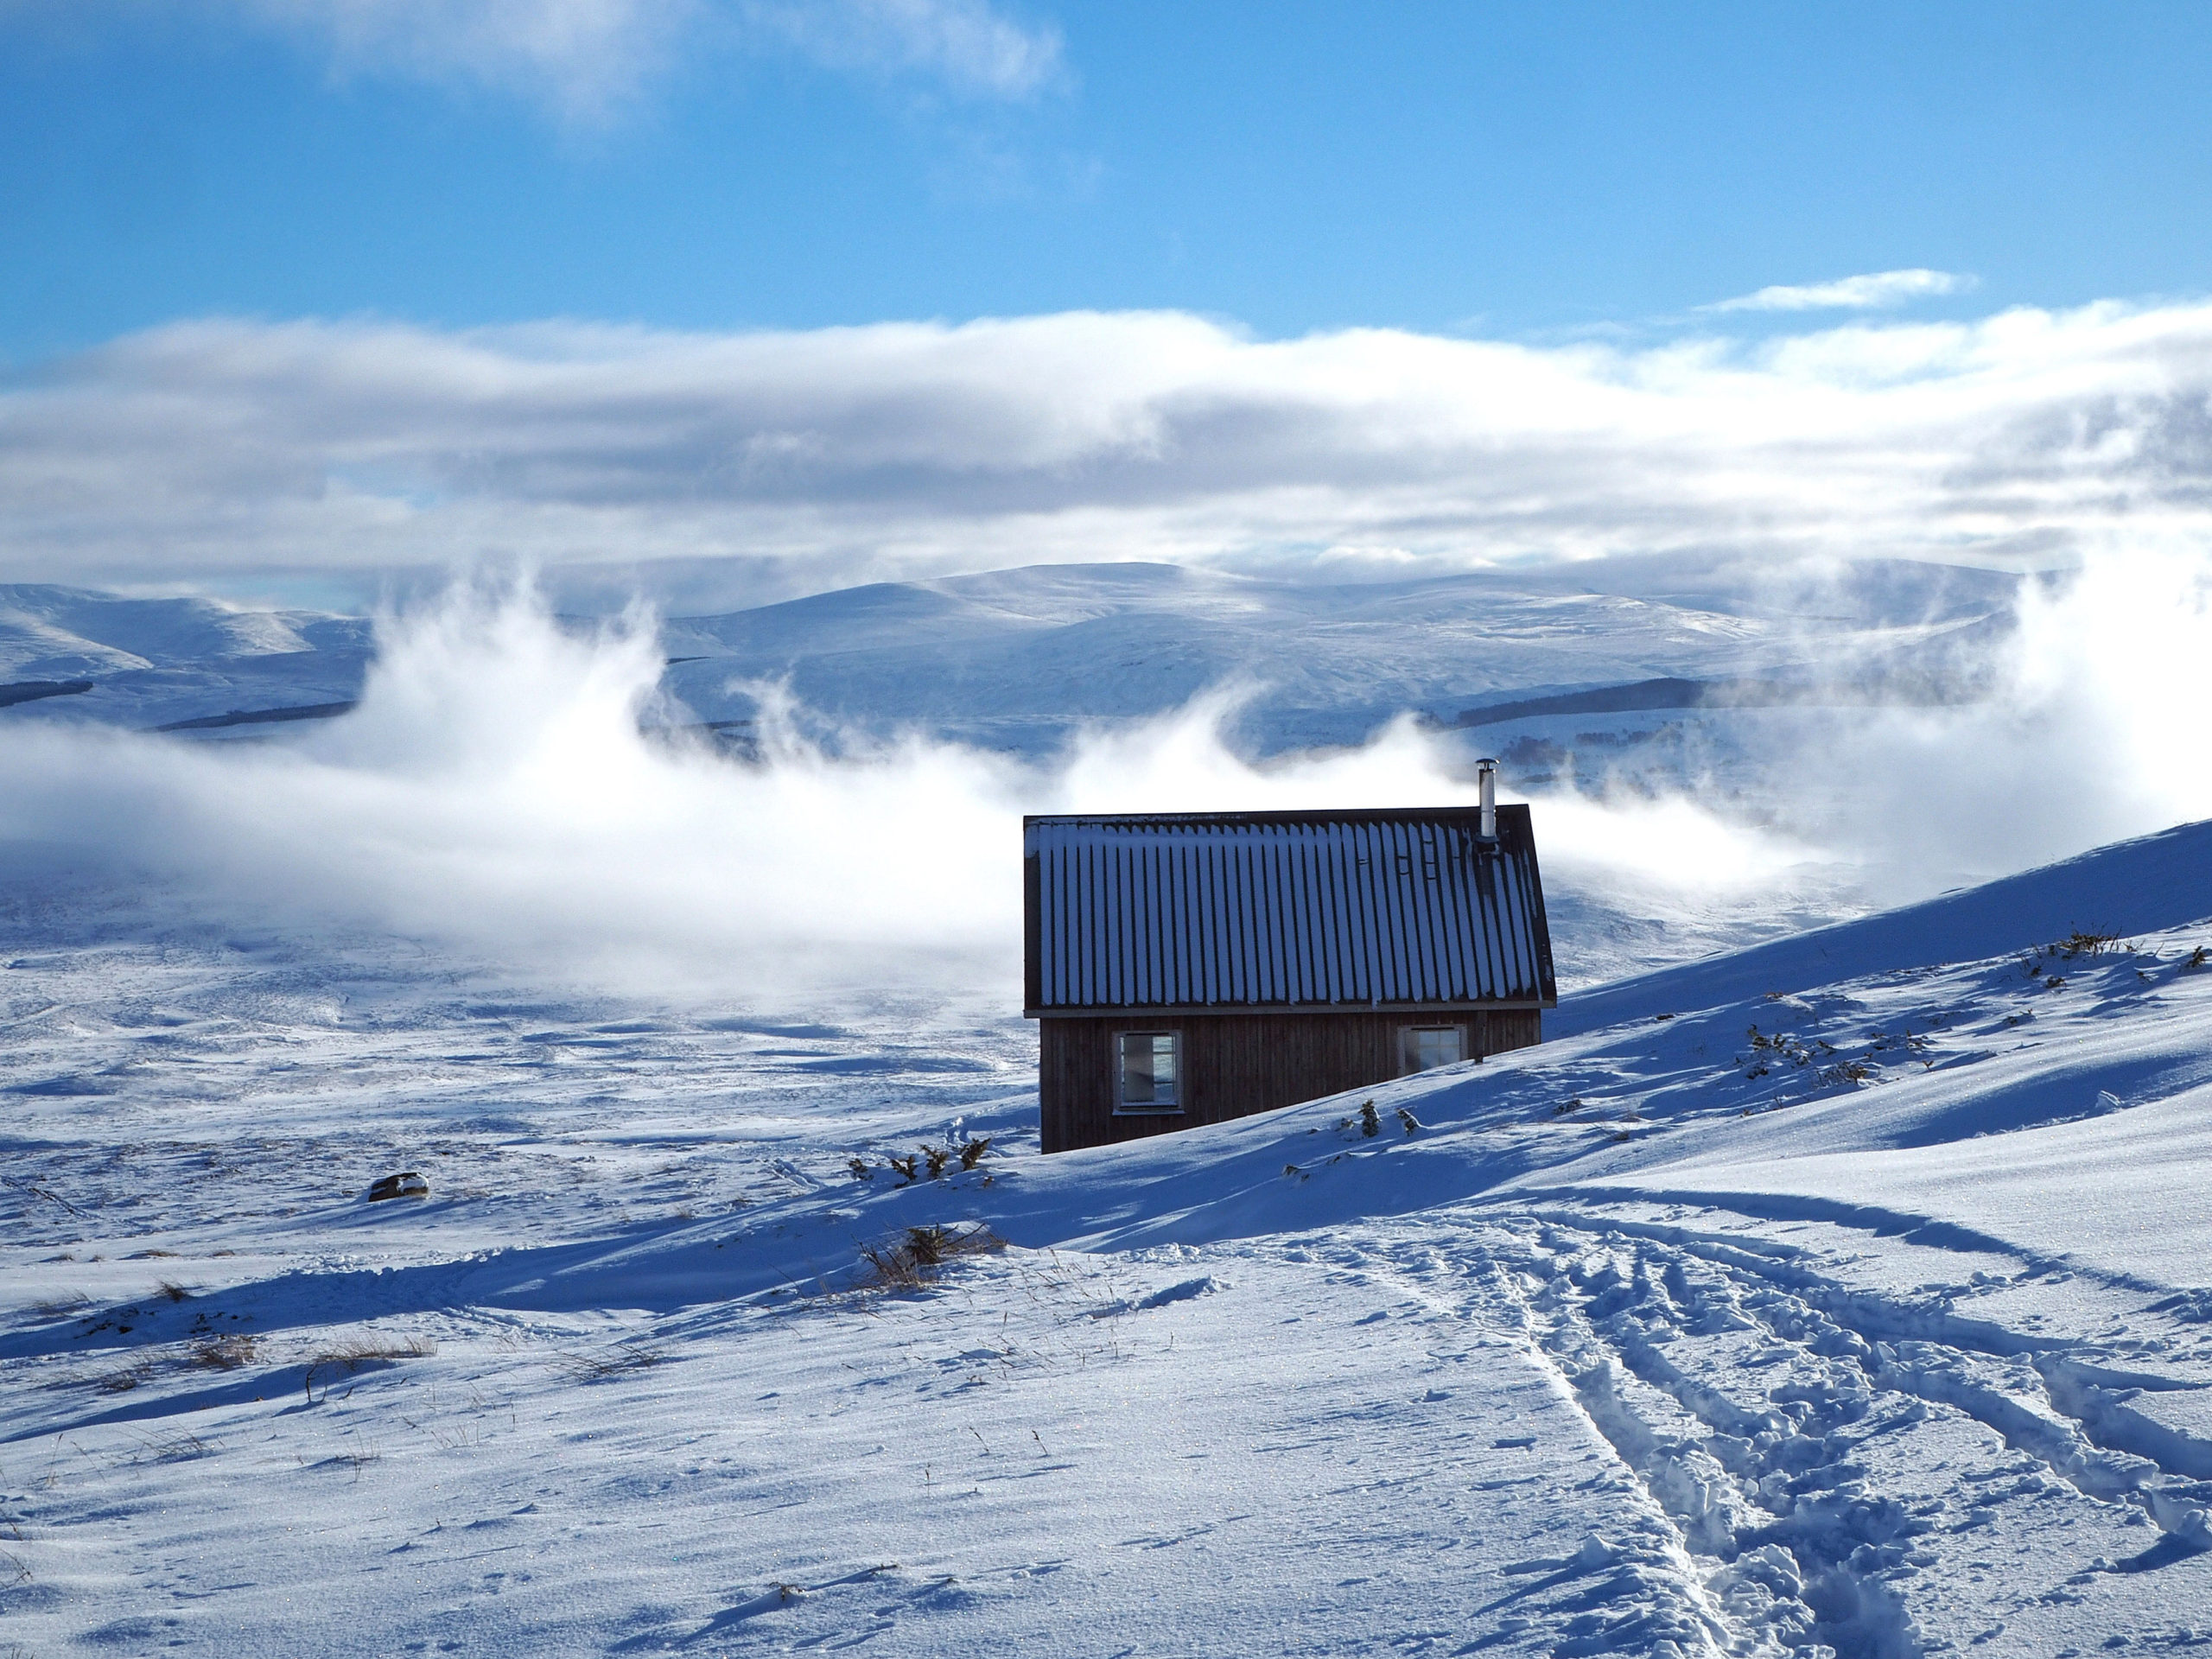 A bothy shelter in the hills above Kingussie